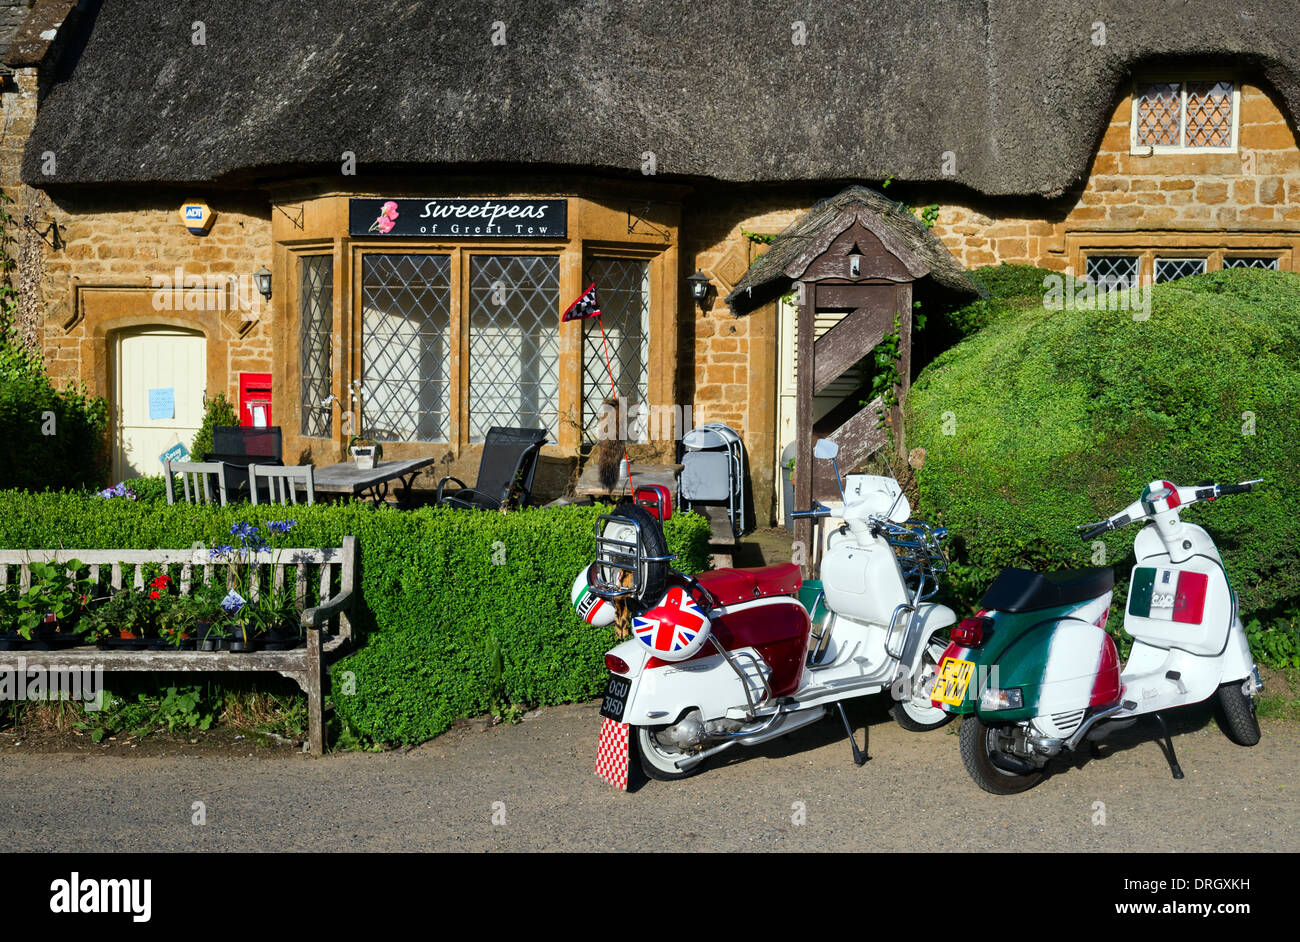 Two vintage lambretta scooters parked outside a thatched sandstone built Cotswold cottage Stock Photo